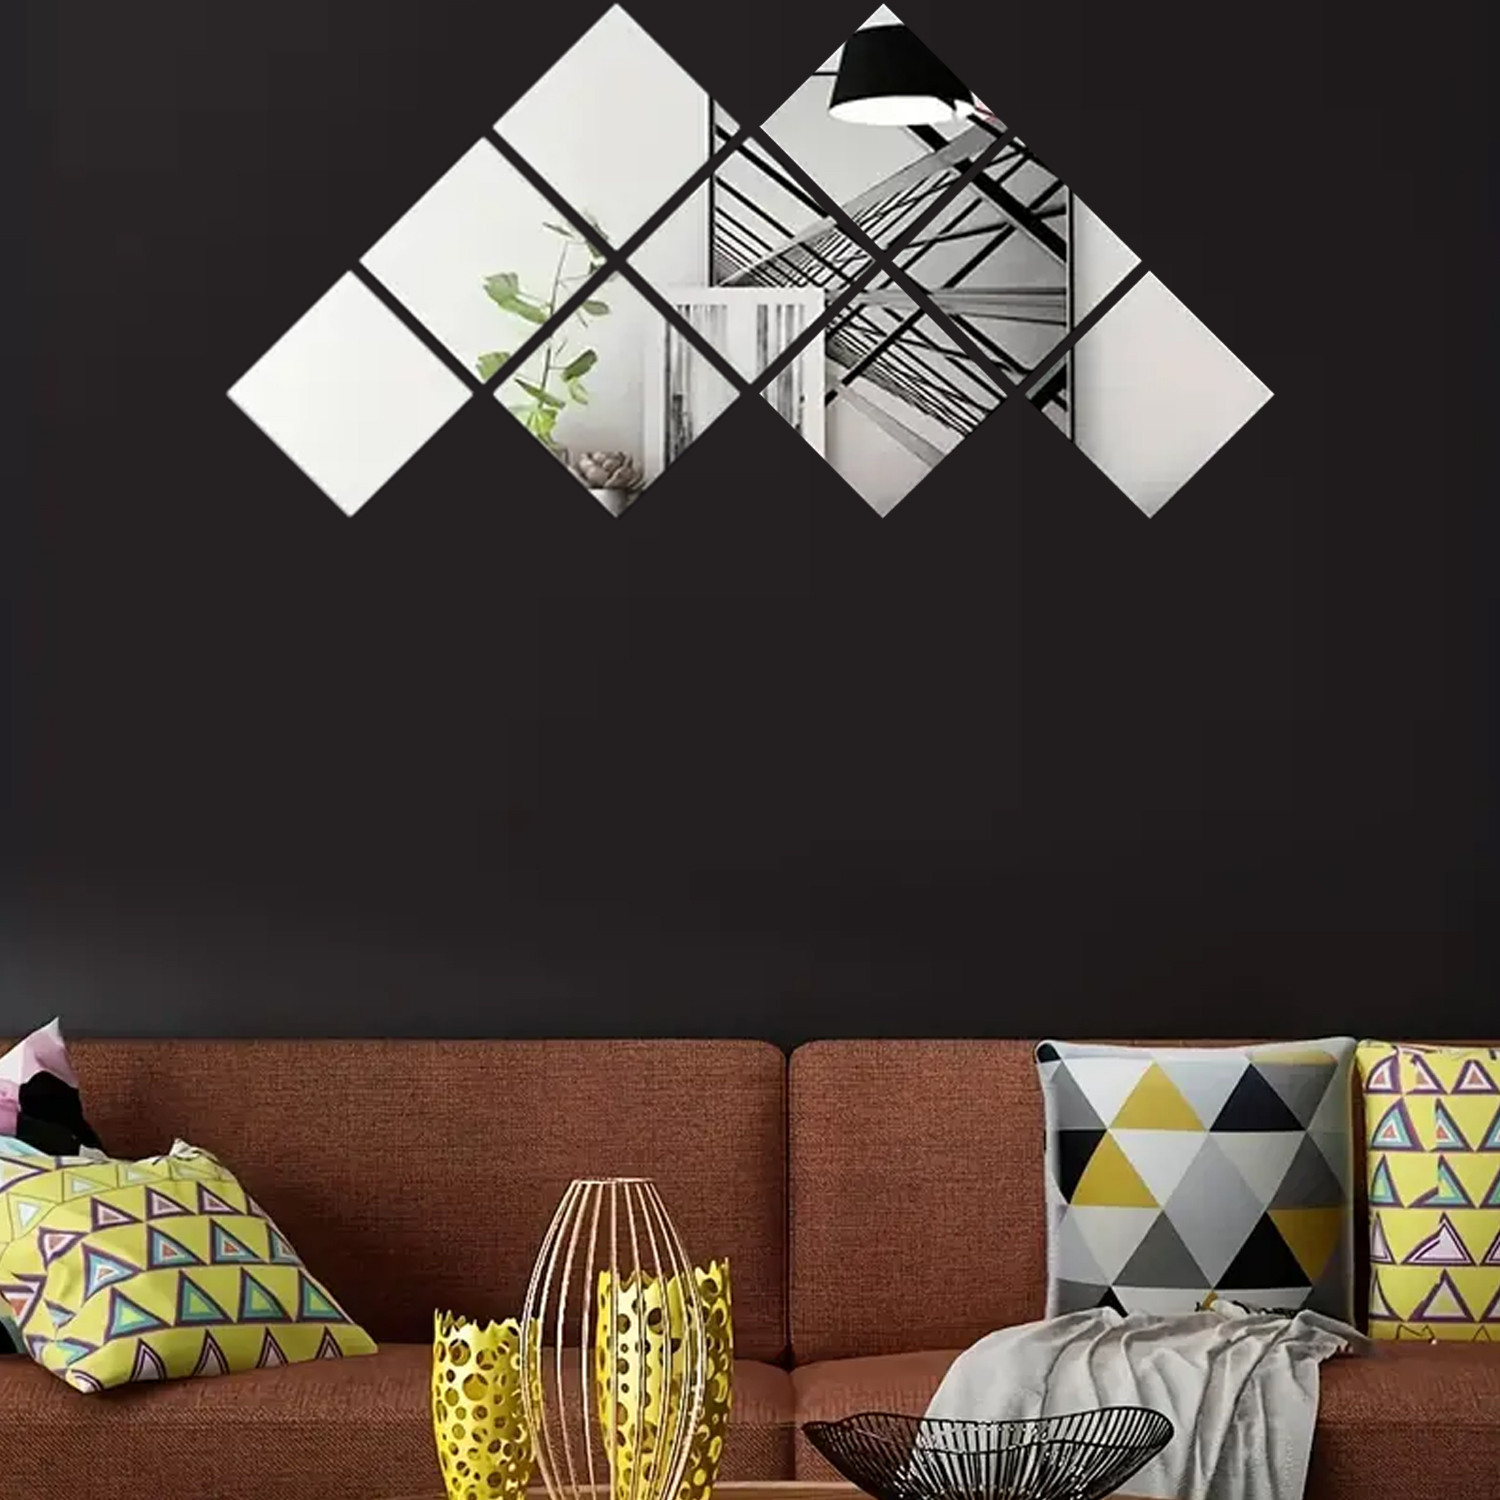 Kuber Industries Self Adhesive Mirror Stickers For Wall|Square Wall Mirror Stickers|Flexible Mirror For Wall Décor, Living Room|Premium Acrylic Material 